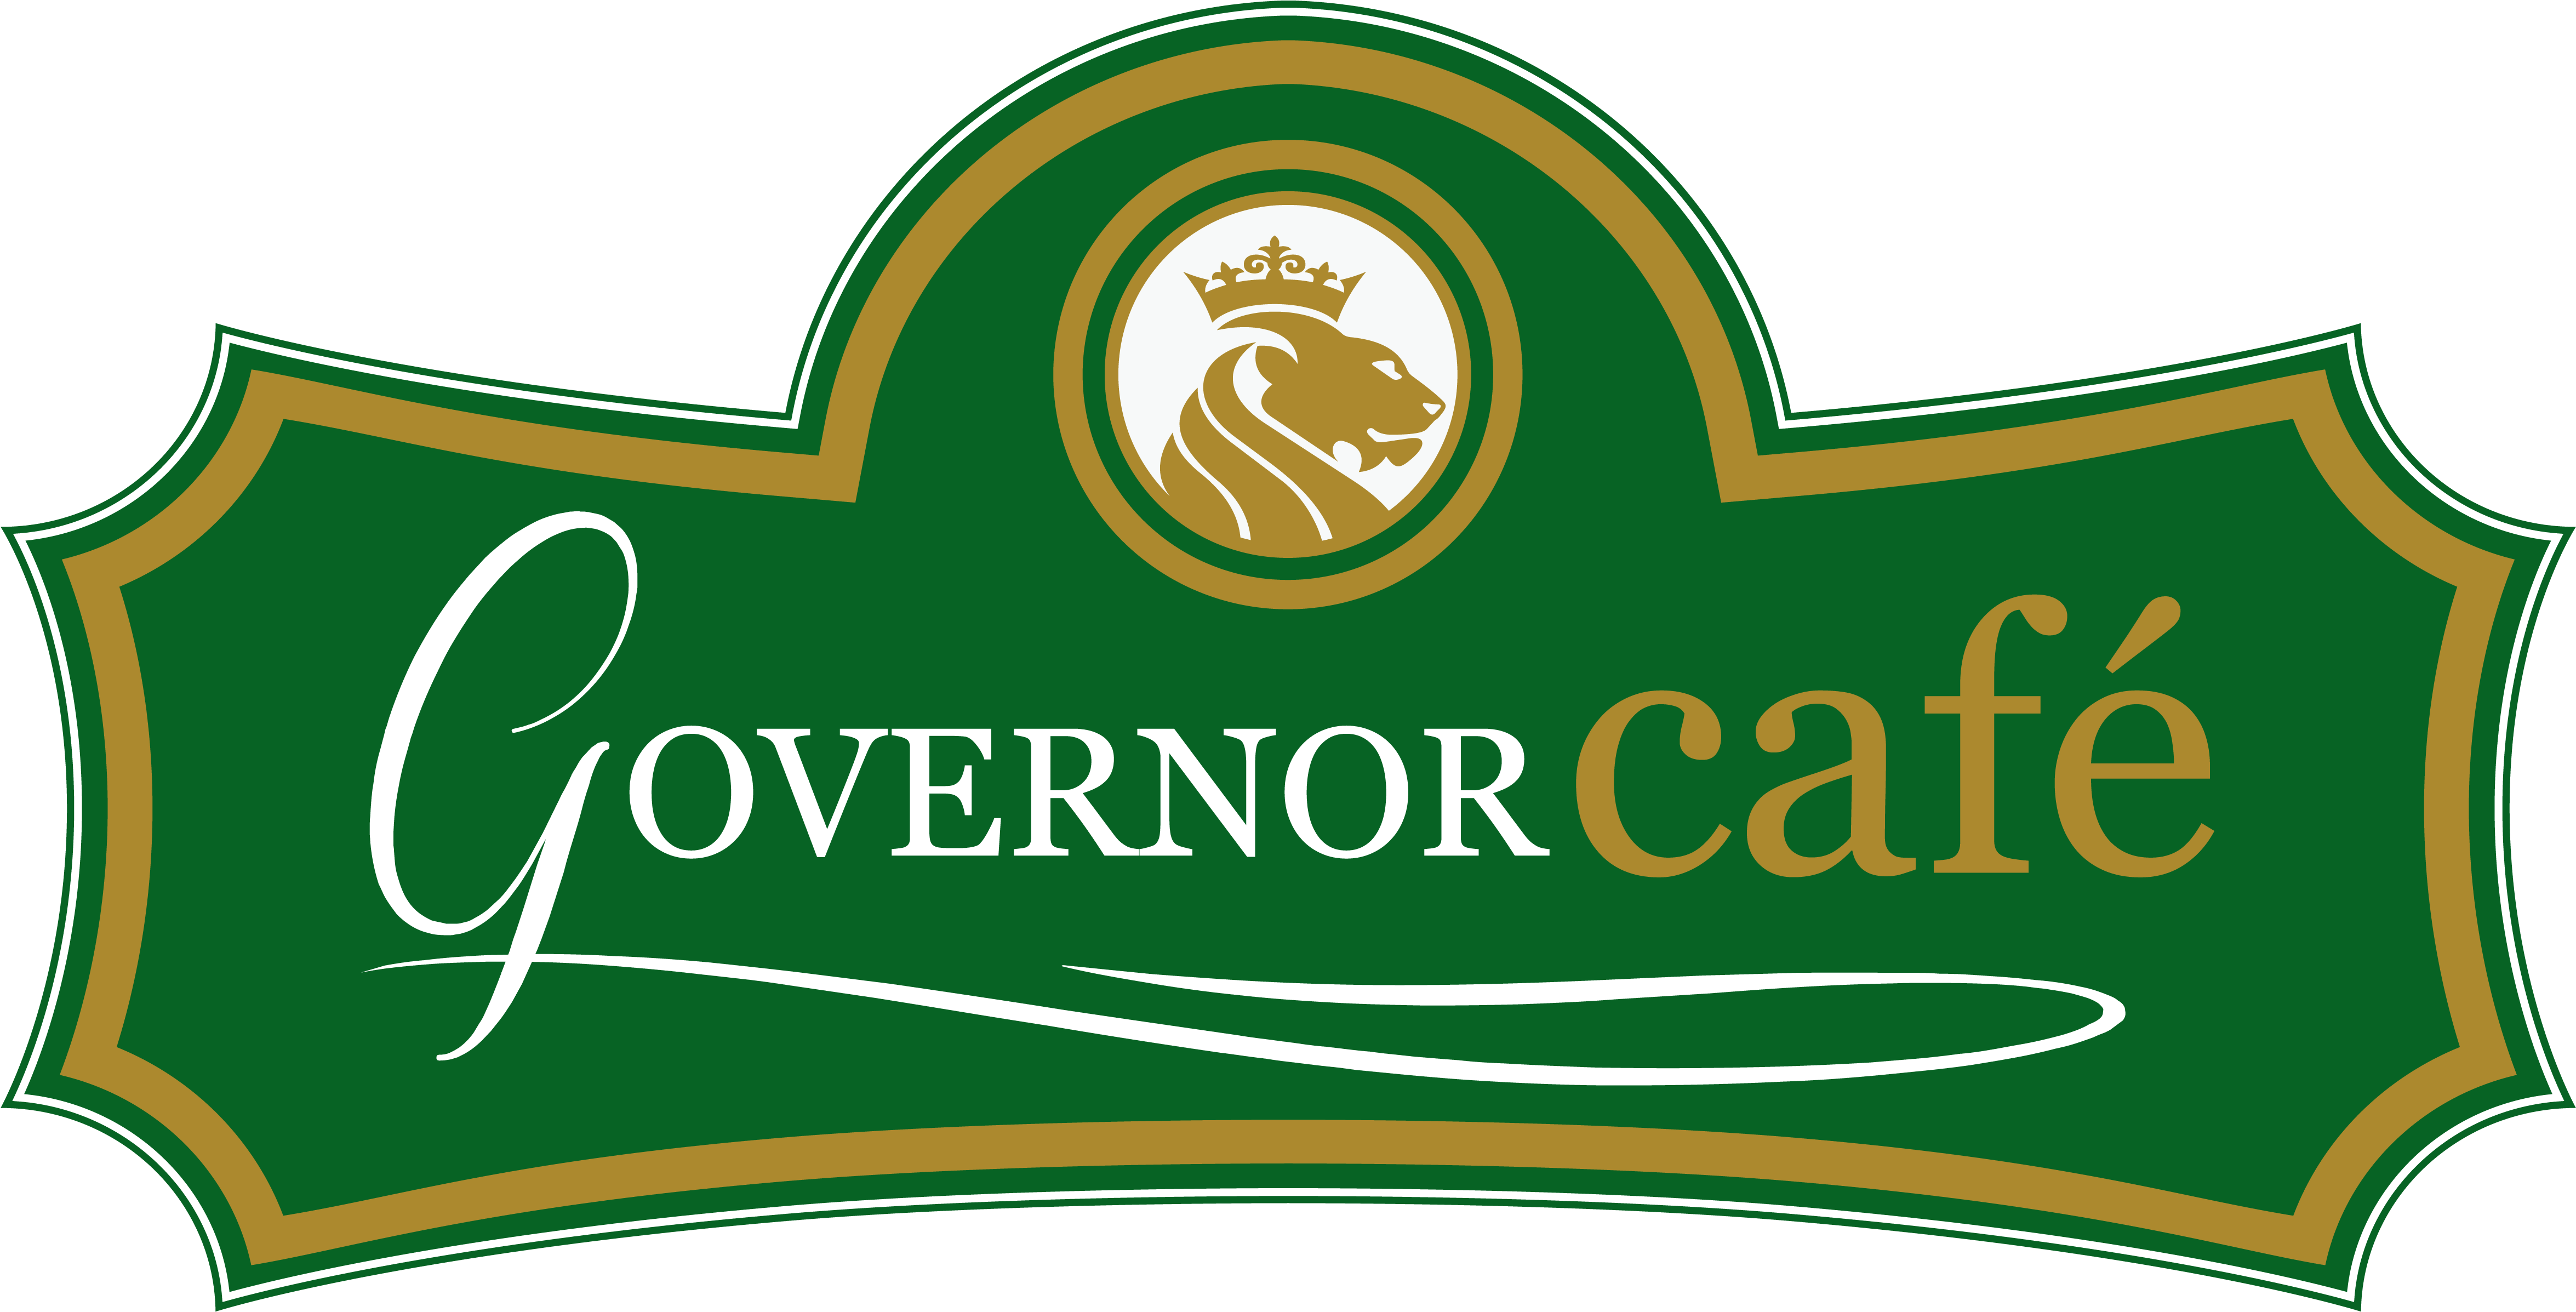 Governor Cafe Logo - Purp And Yellow (4806x2516)